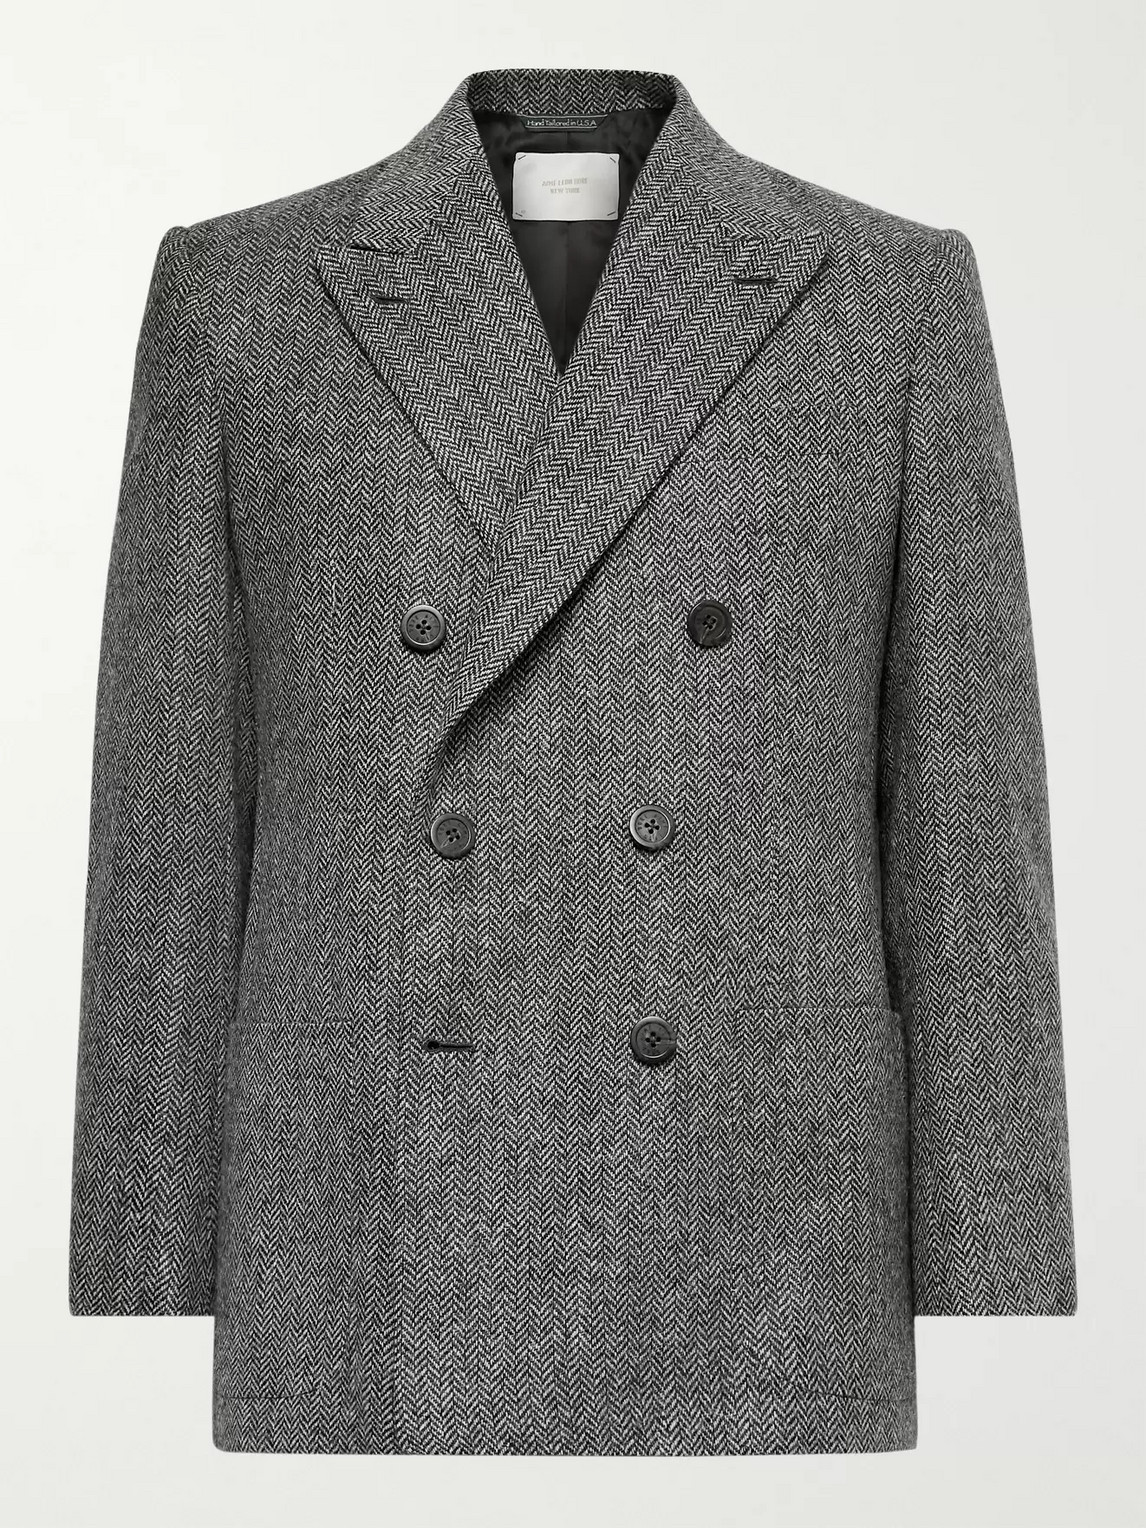 Aimé Leon Dore Martin Greenfield Double-breasted Herringbone Wool Suit Jacket In Gray